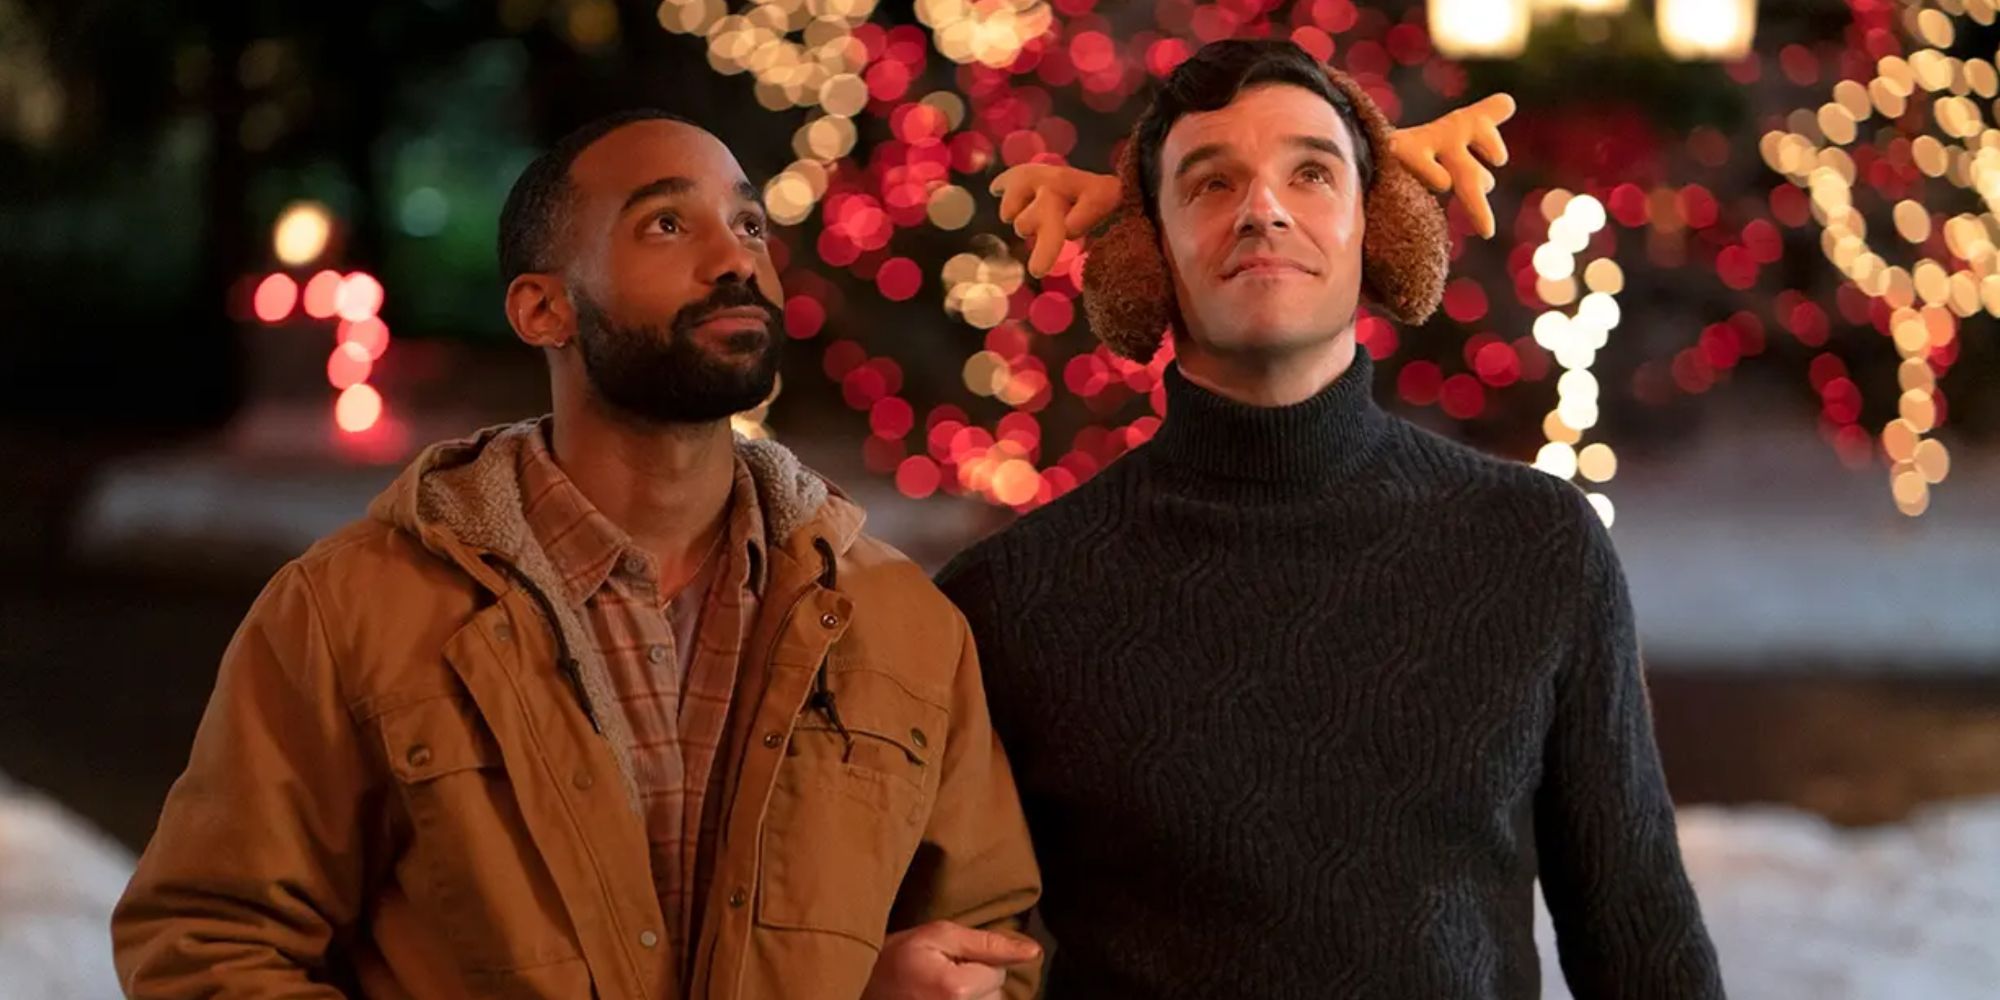 Philemon Chambers and Michael Urie as Nick and Peter looking up with looks of awe in Single All the Way